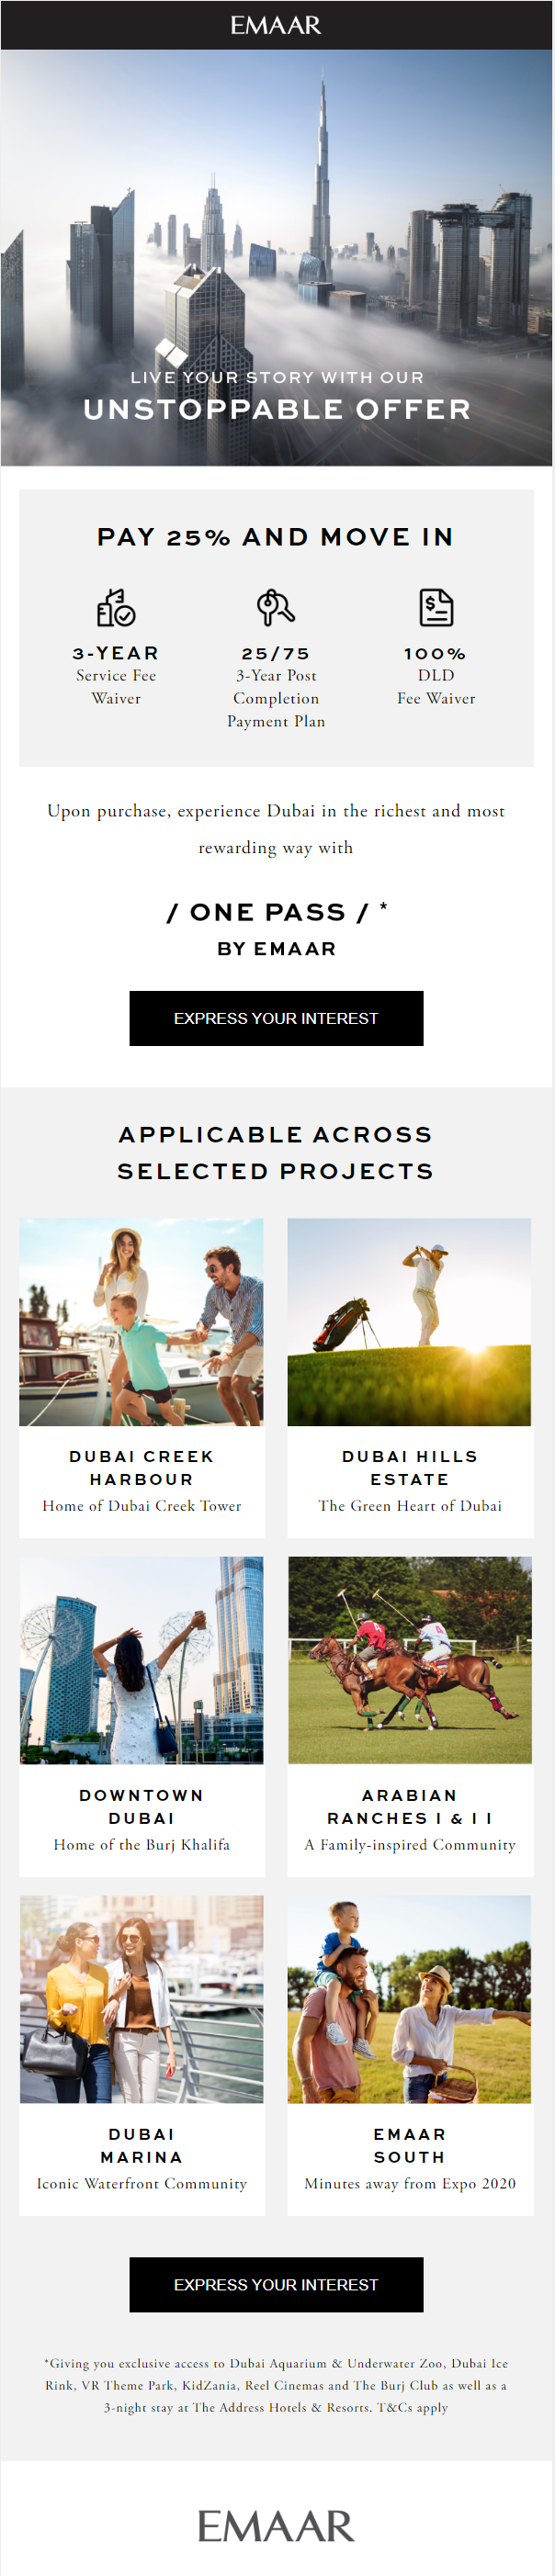 Pay 25% and move in at Emaar Properties in Dubai Update